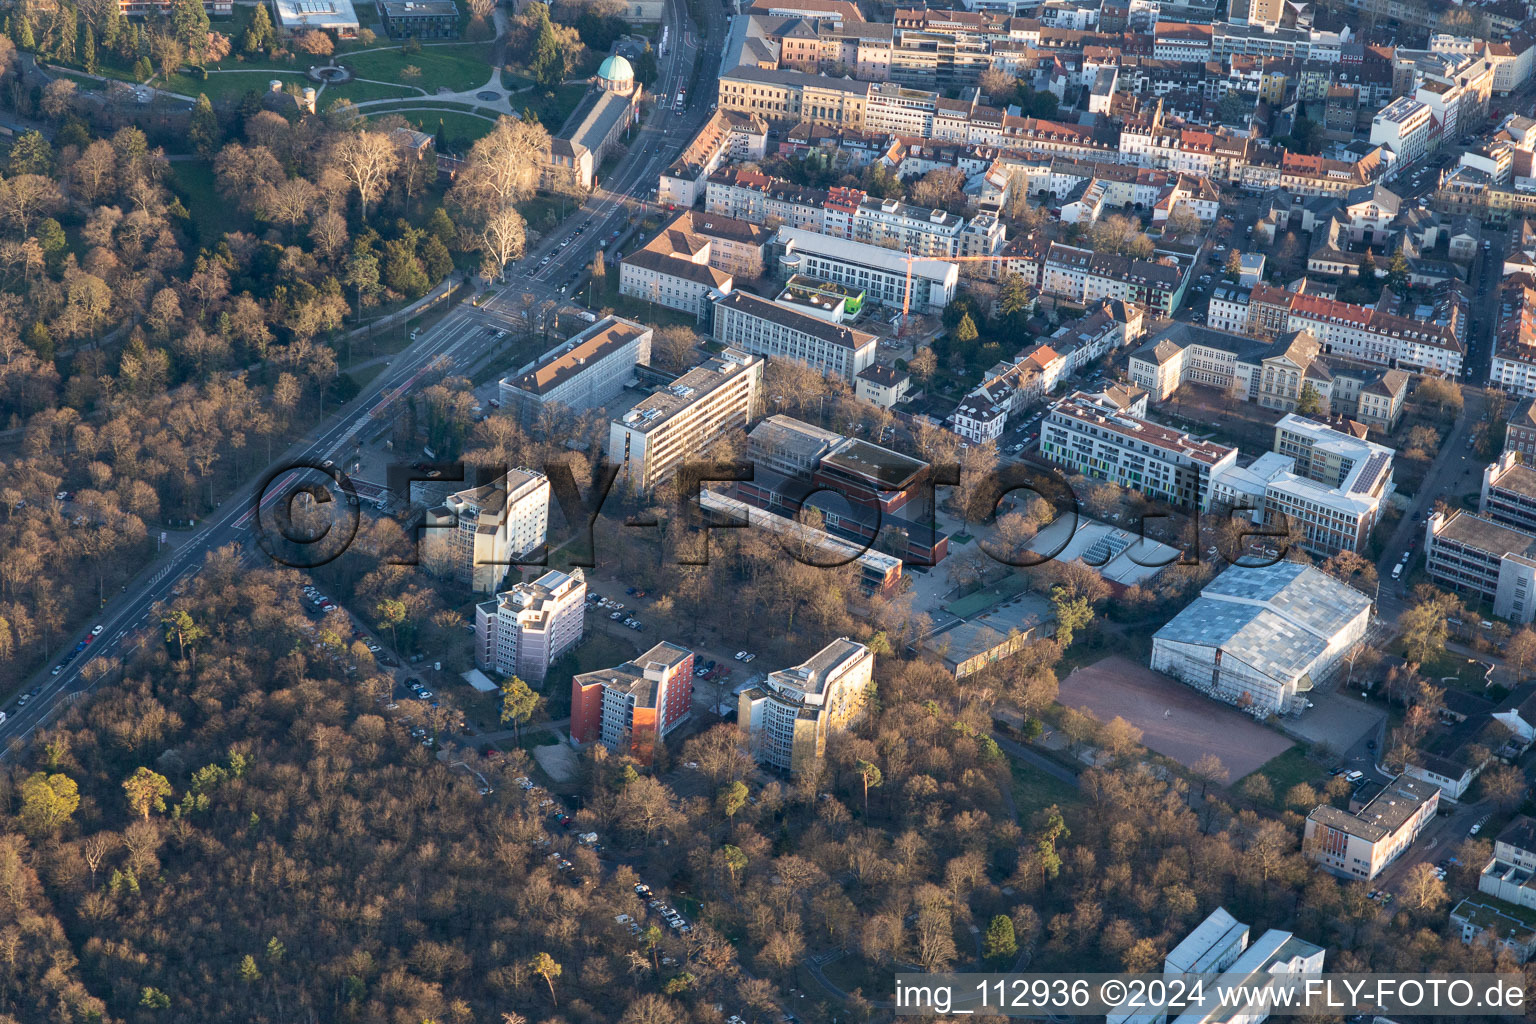 Aerial view of Domus 7, Reinhold Schneider House, Hermann Ehlers College in the district Innenstadt-West in Karlsruhe in the state Baden-Wuerttemberg, Germany